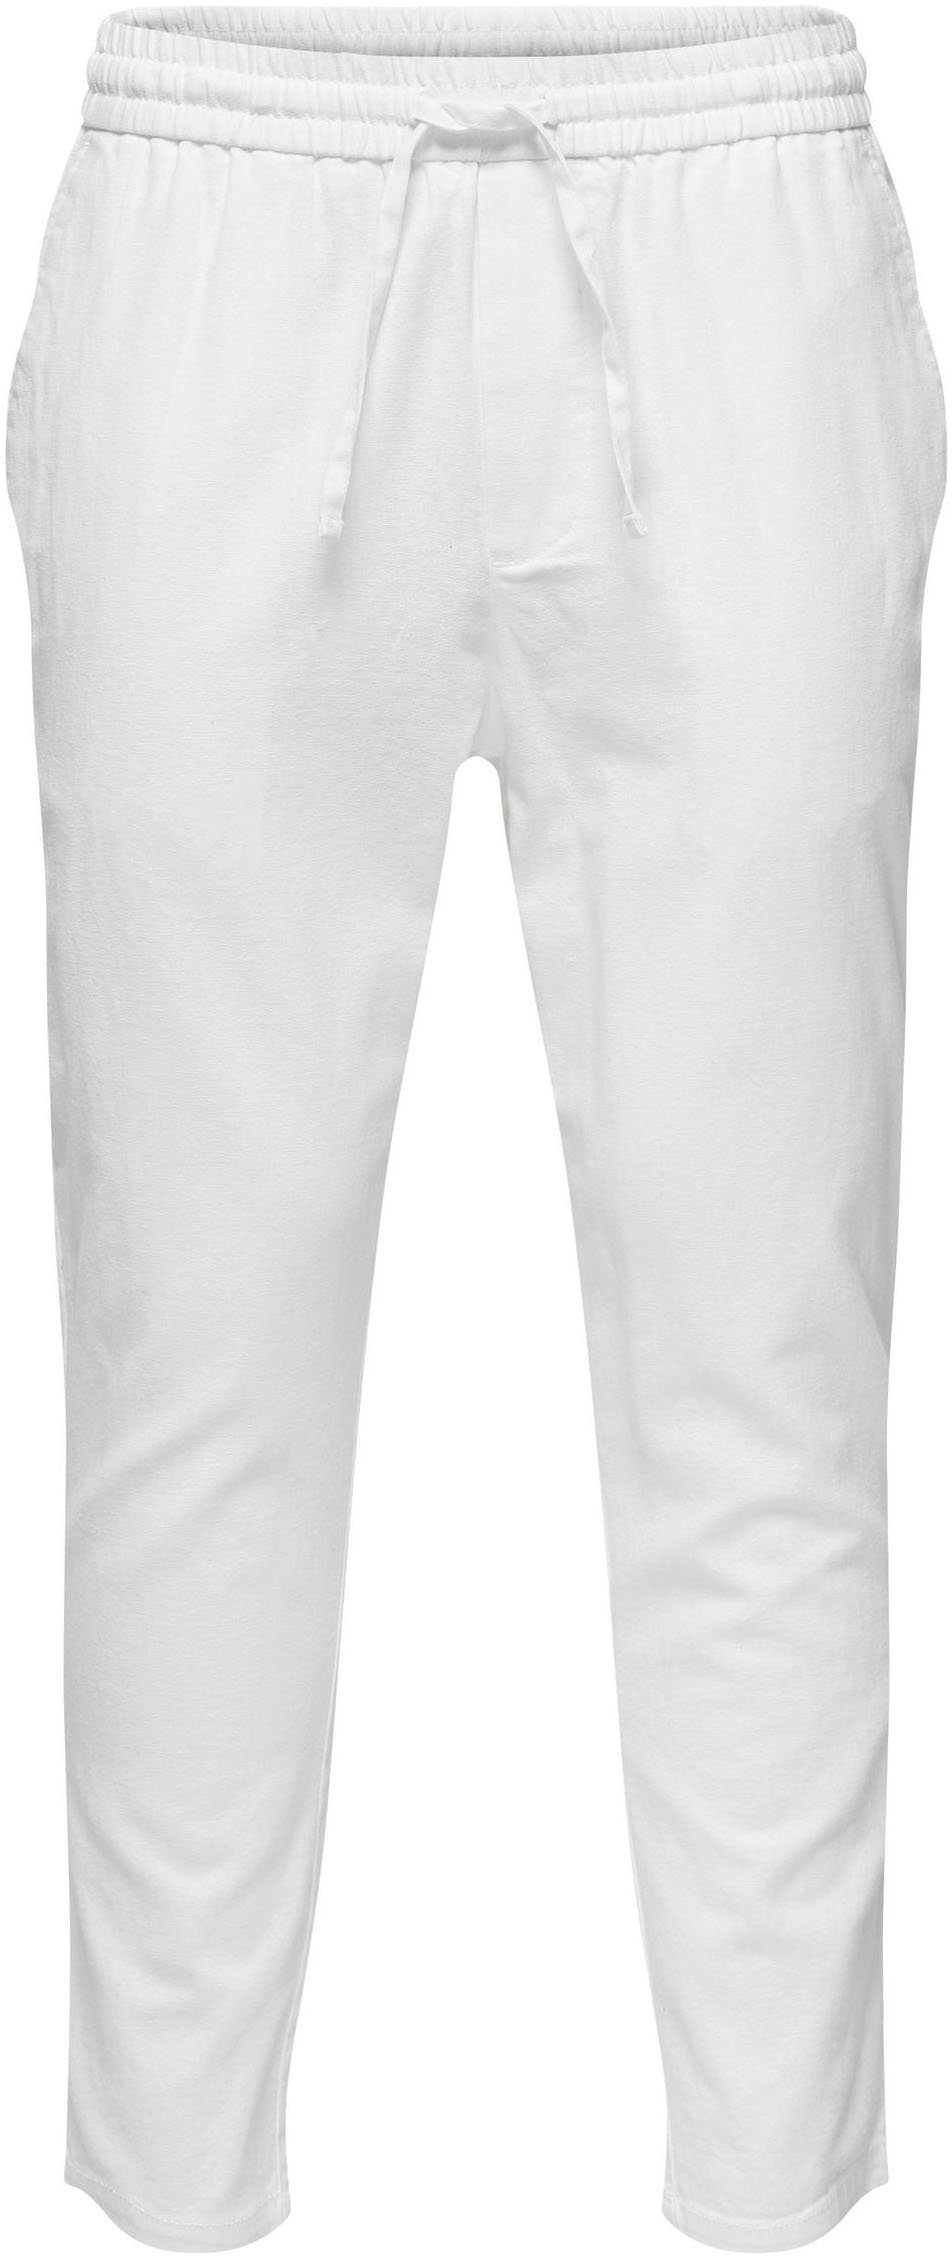 White & CROP Stoffhose LIN ONSLINUS mit ONLY SONS PNT 0007 Leinen Bright COT NOOS